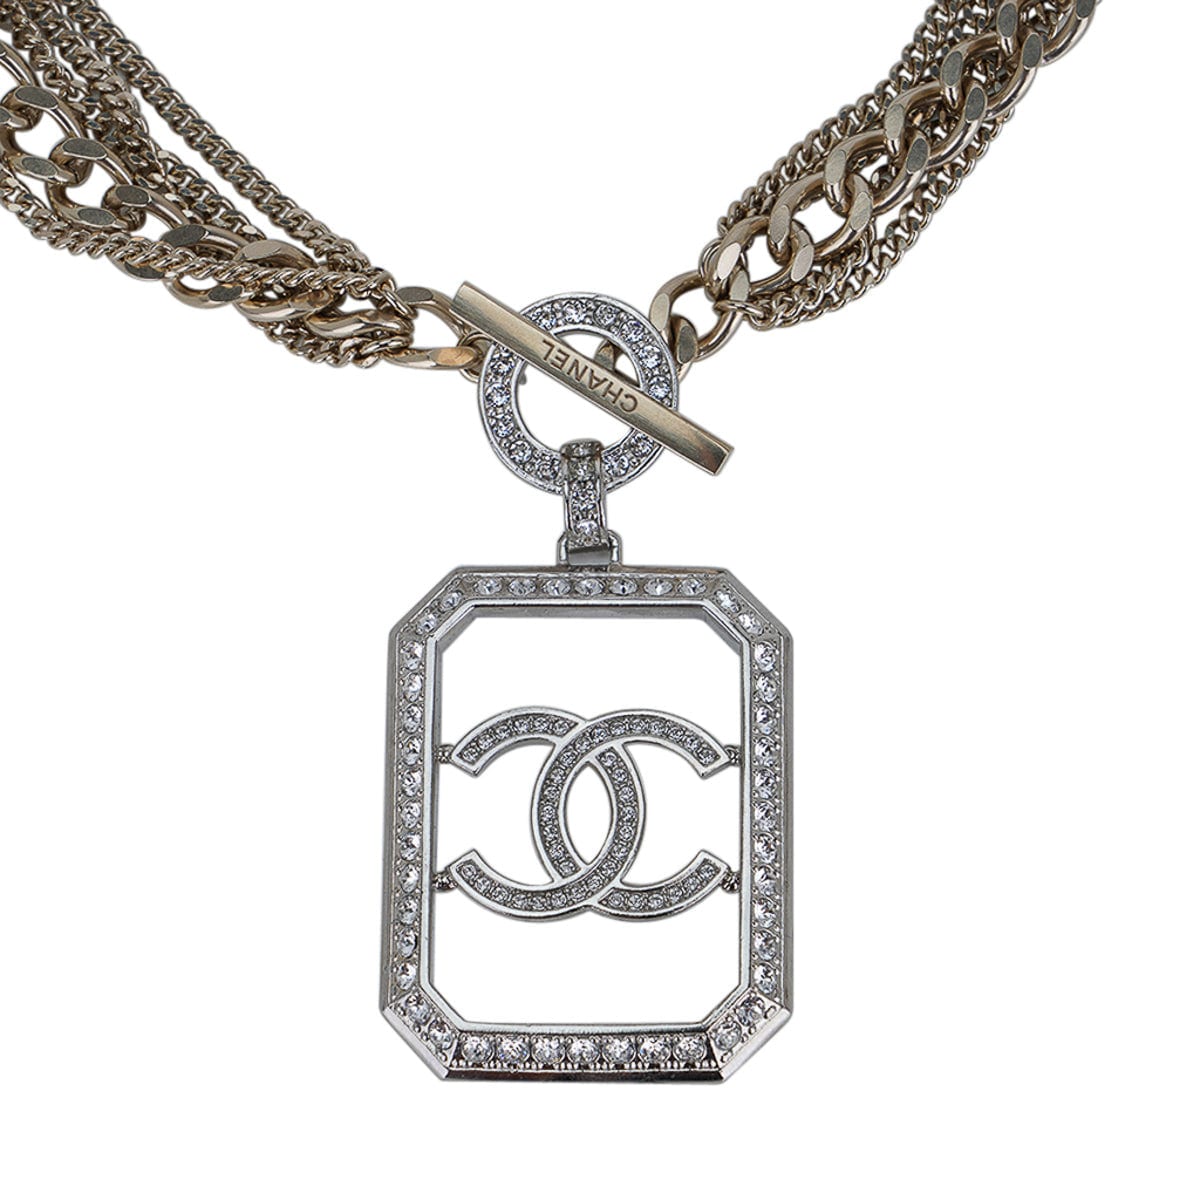 CHANEL, Jewelry, Authentic Chanel Pendant Necklace